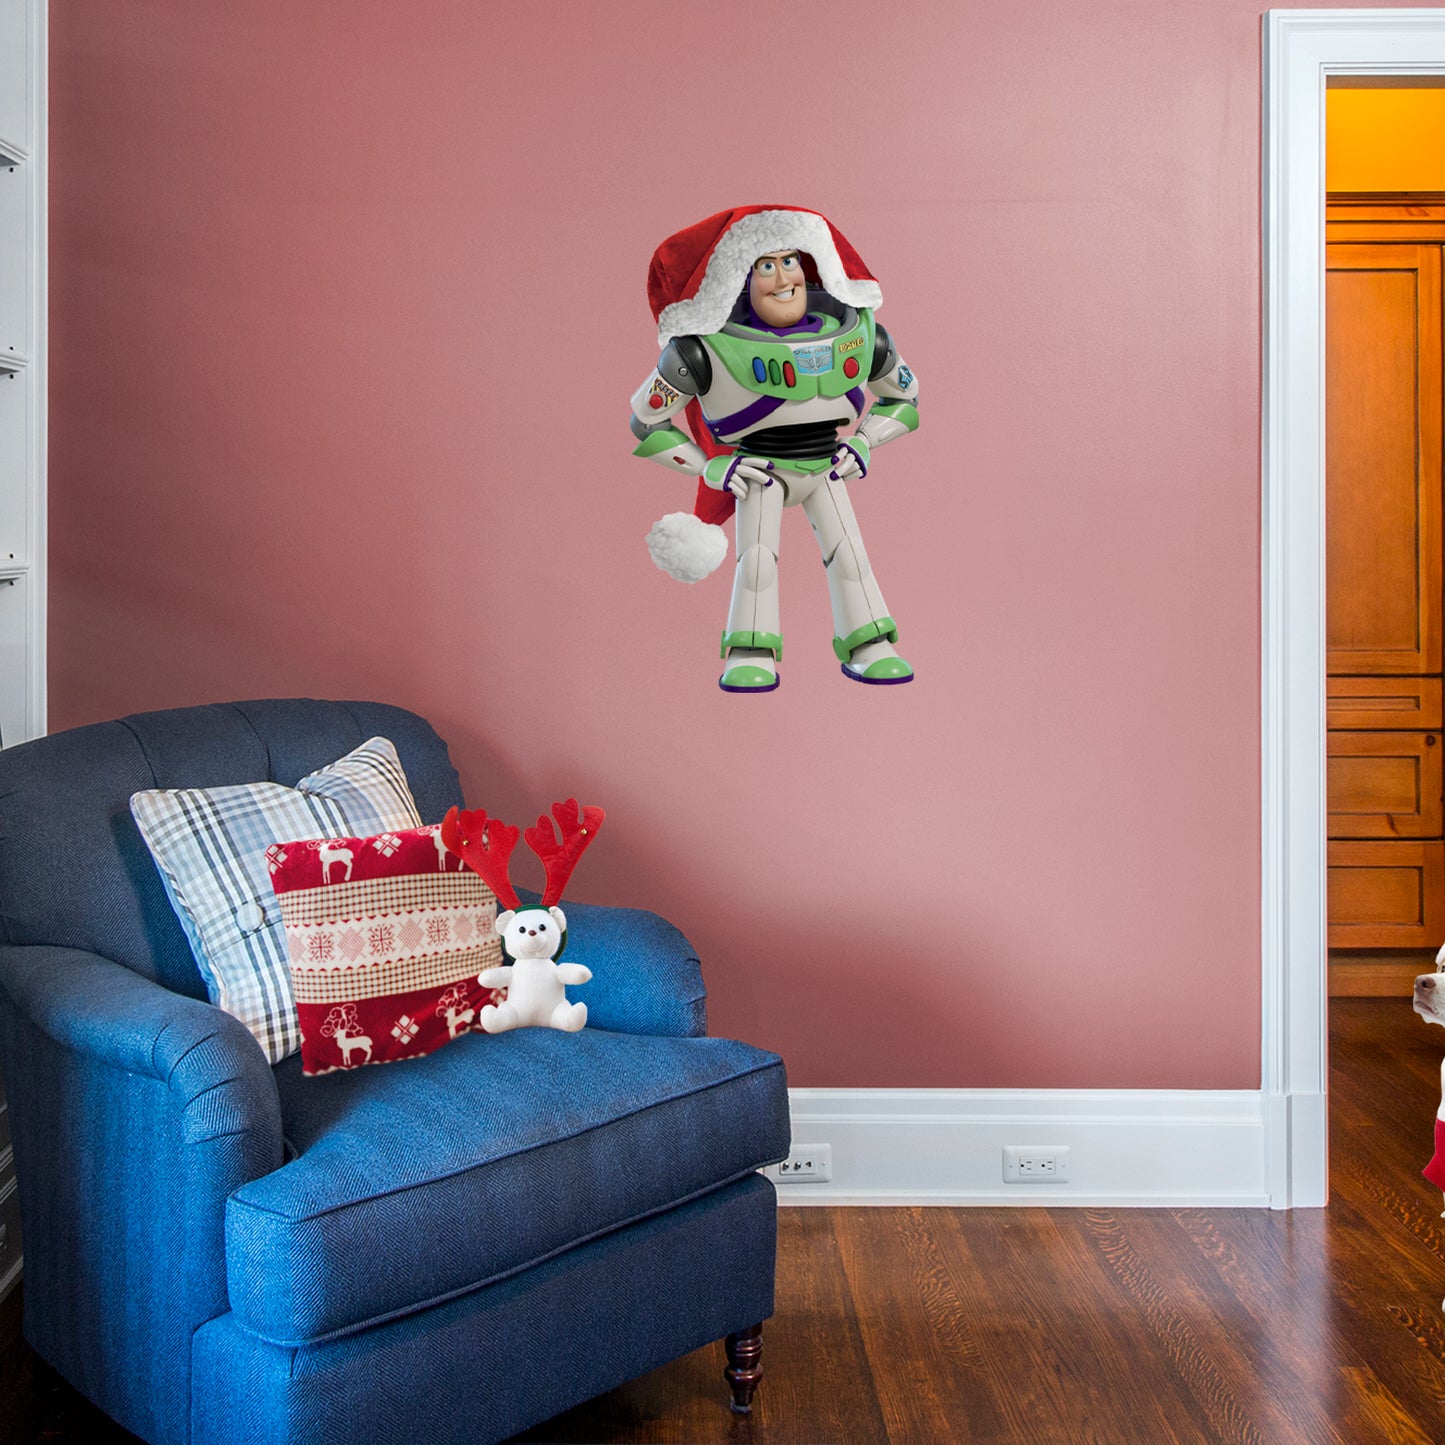 Pixar Holiday: Buzz Lightyear Santa Hat RealBig - Officially Licensed Disney Removable Adhesive Decal